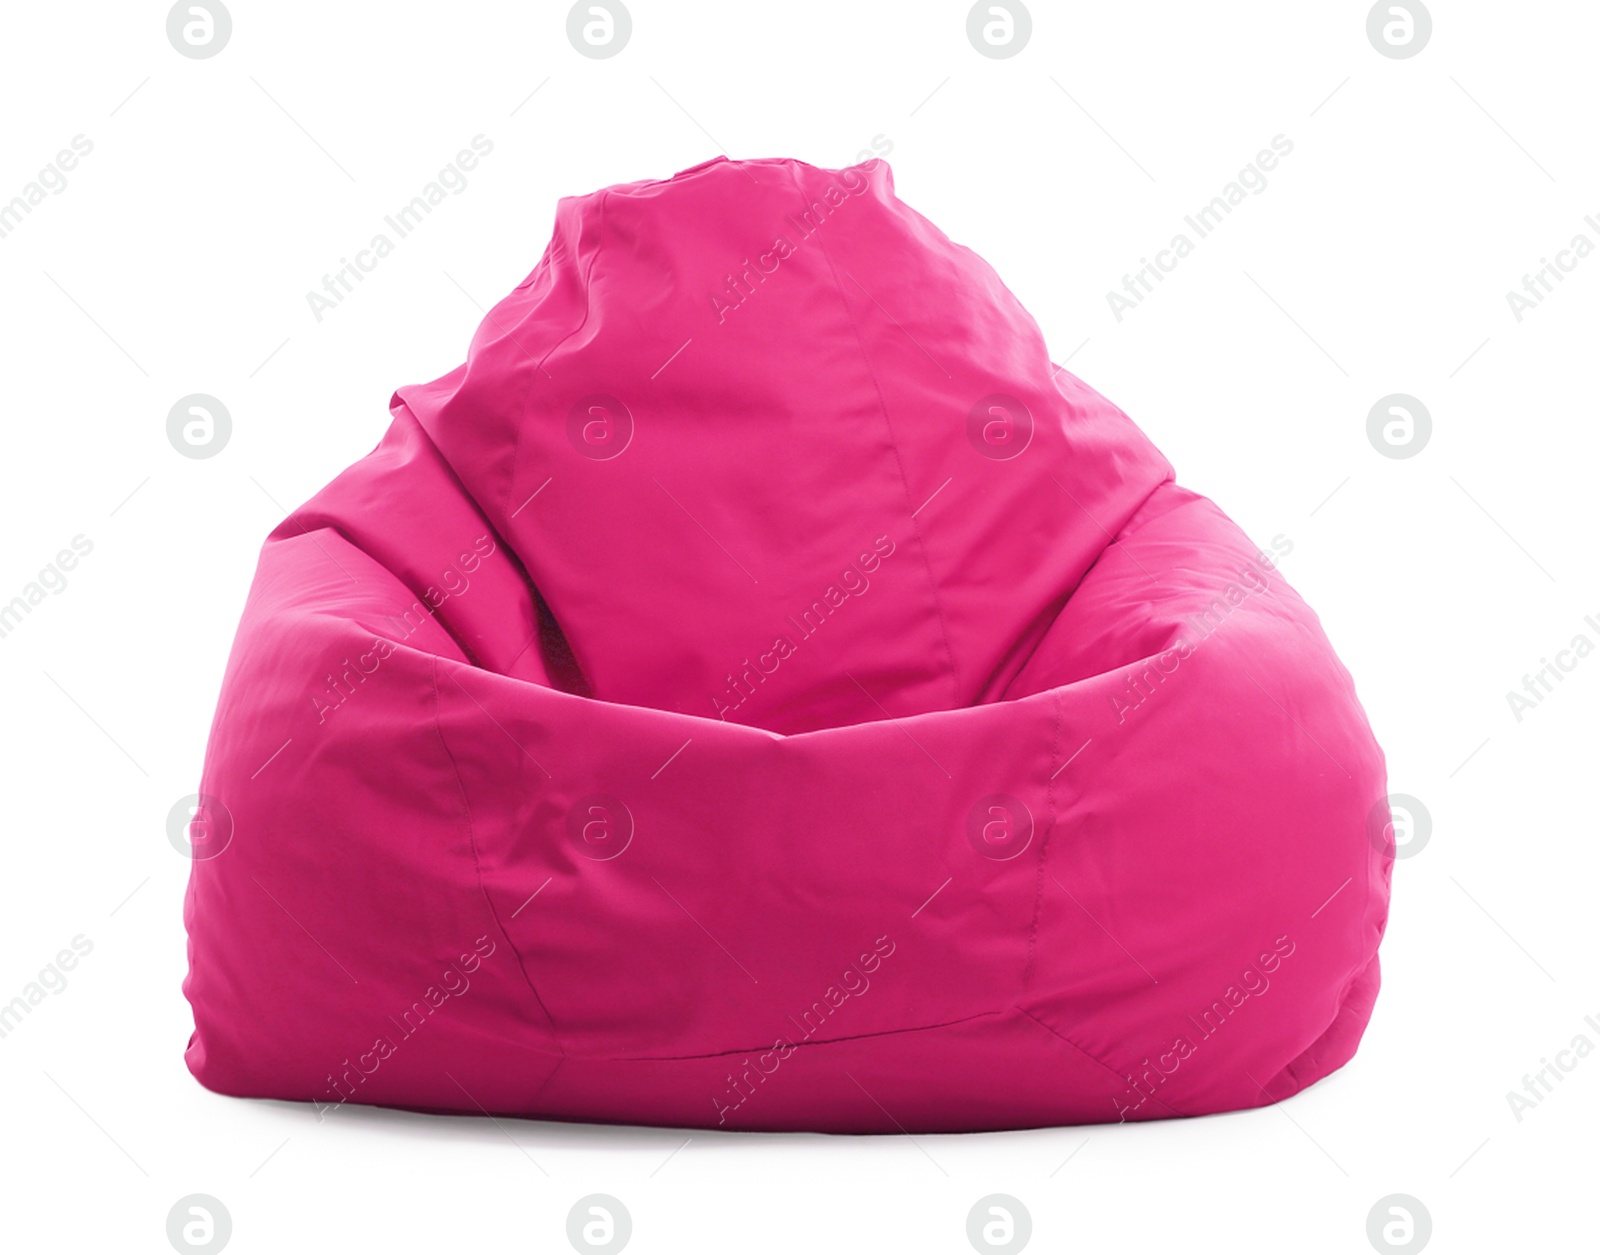 Image of One crimson bean bag chair isolated on white